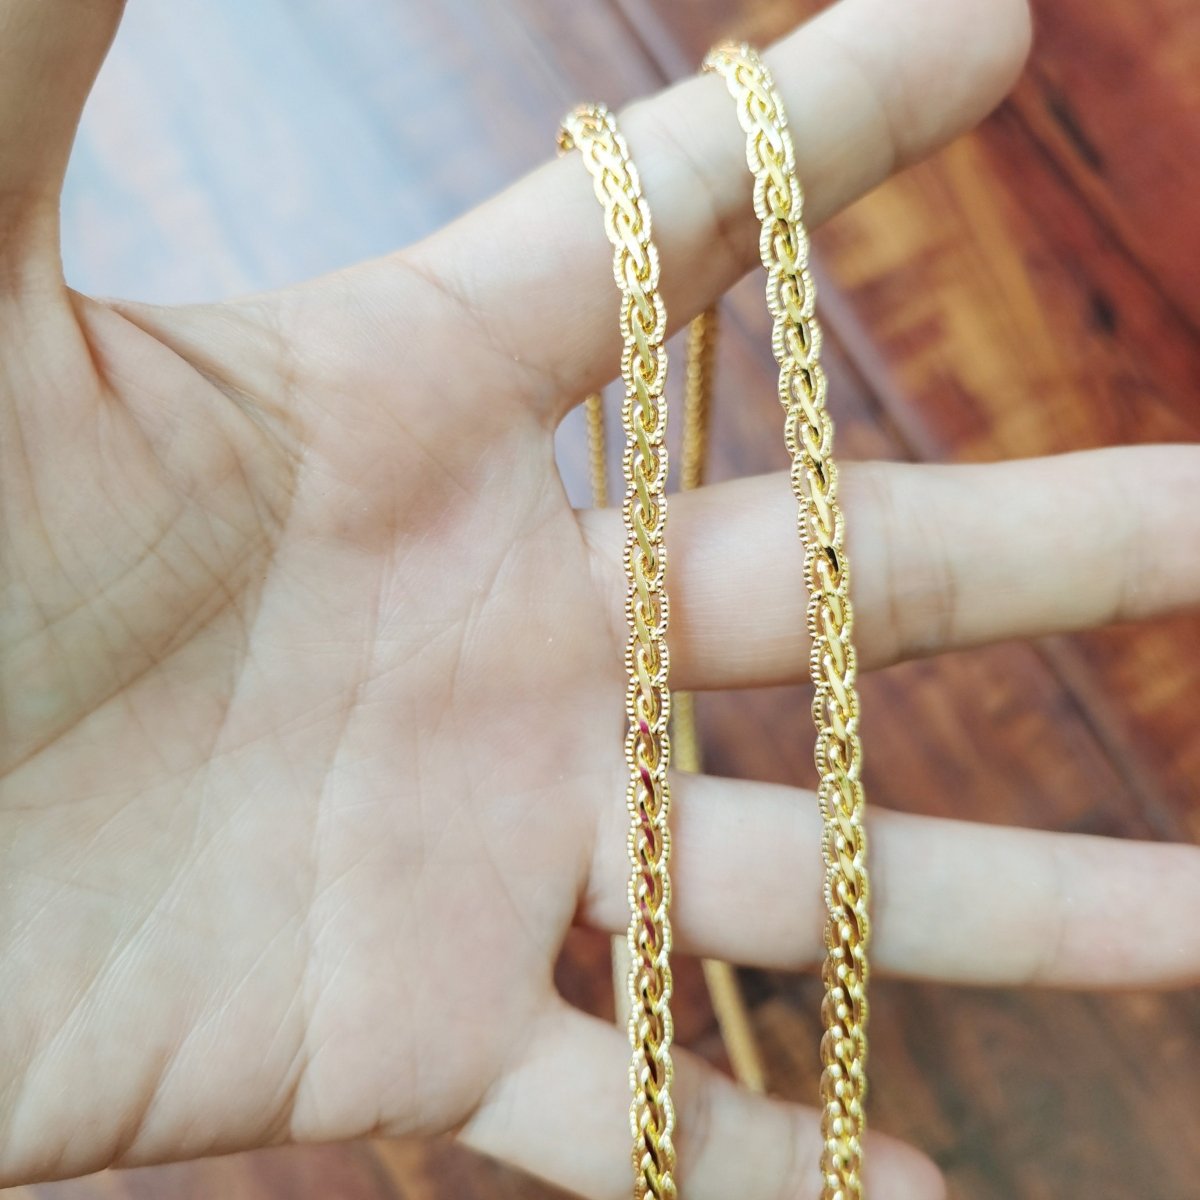 24K Gold Plated Snake Tinsel Designed Chain, 4mm Gold Designed Chain, Vintage Gold Designed Chain, 20 inches Designed Necklace w/ Lobster Clasps | CN-754 Clearance Pricing - DLUXCA